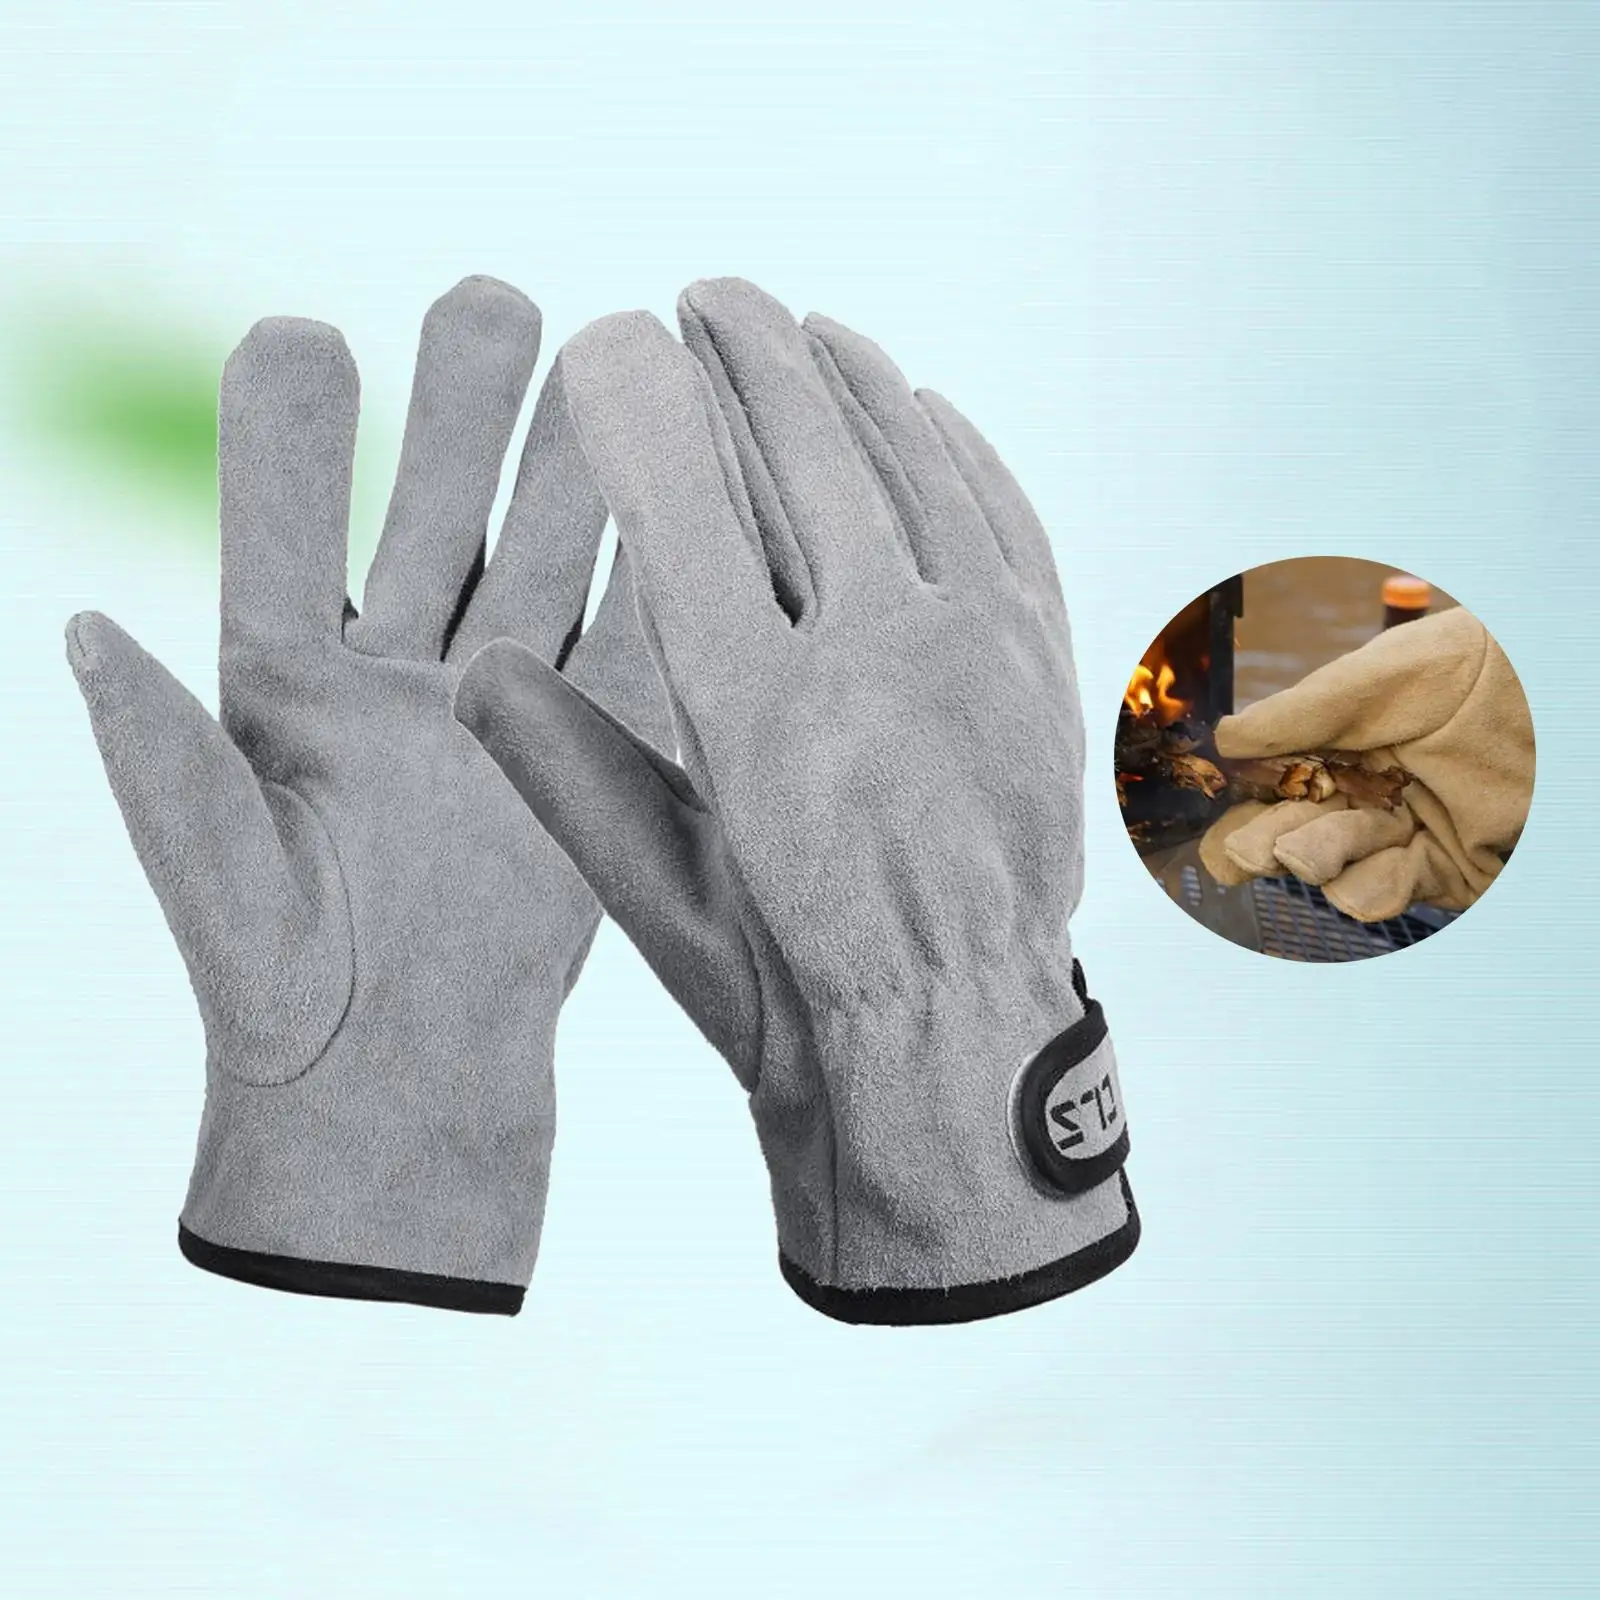 Outdoor Leather Work Gloves Heat Resistance Utility Welding Gloves Camping